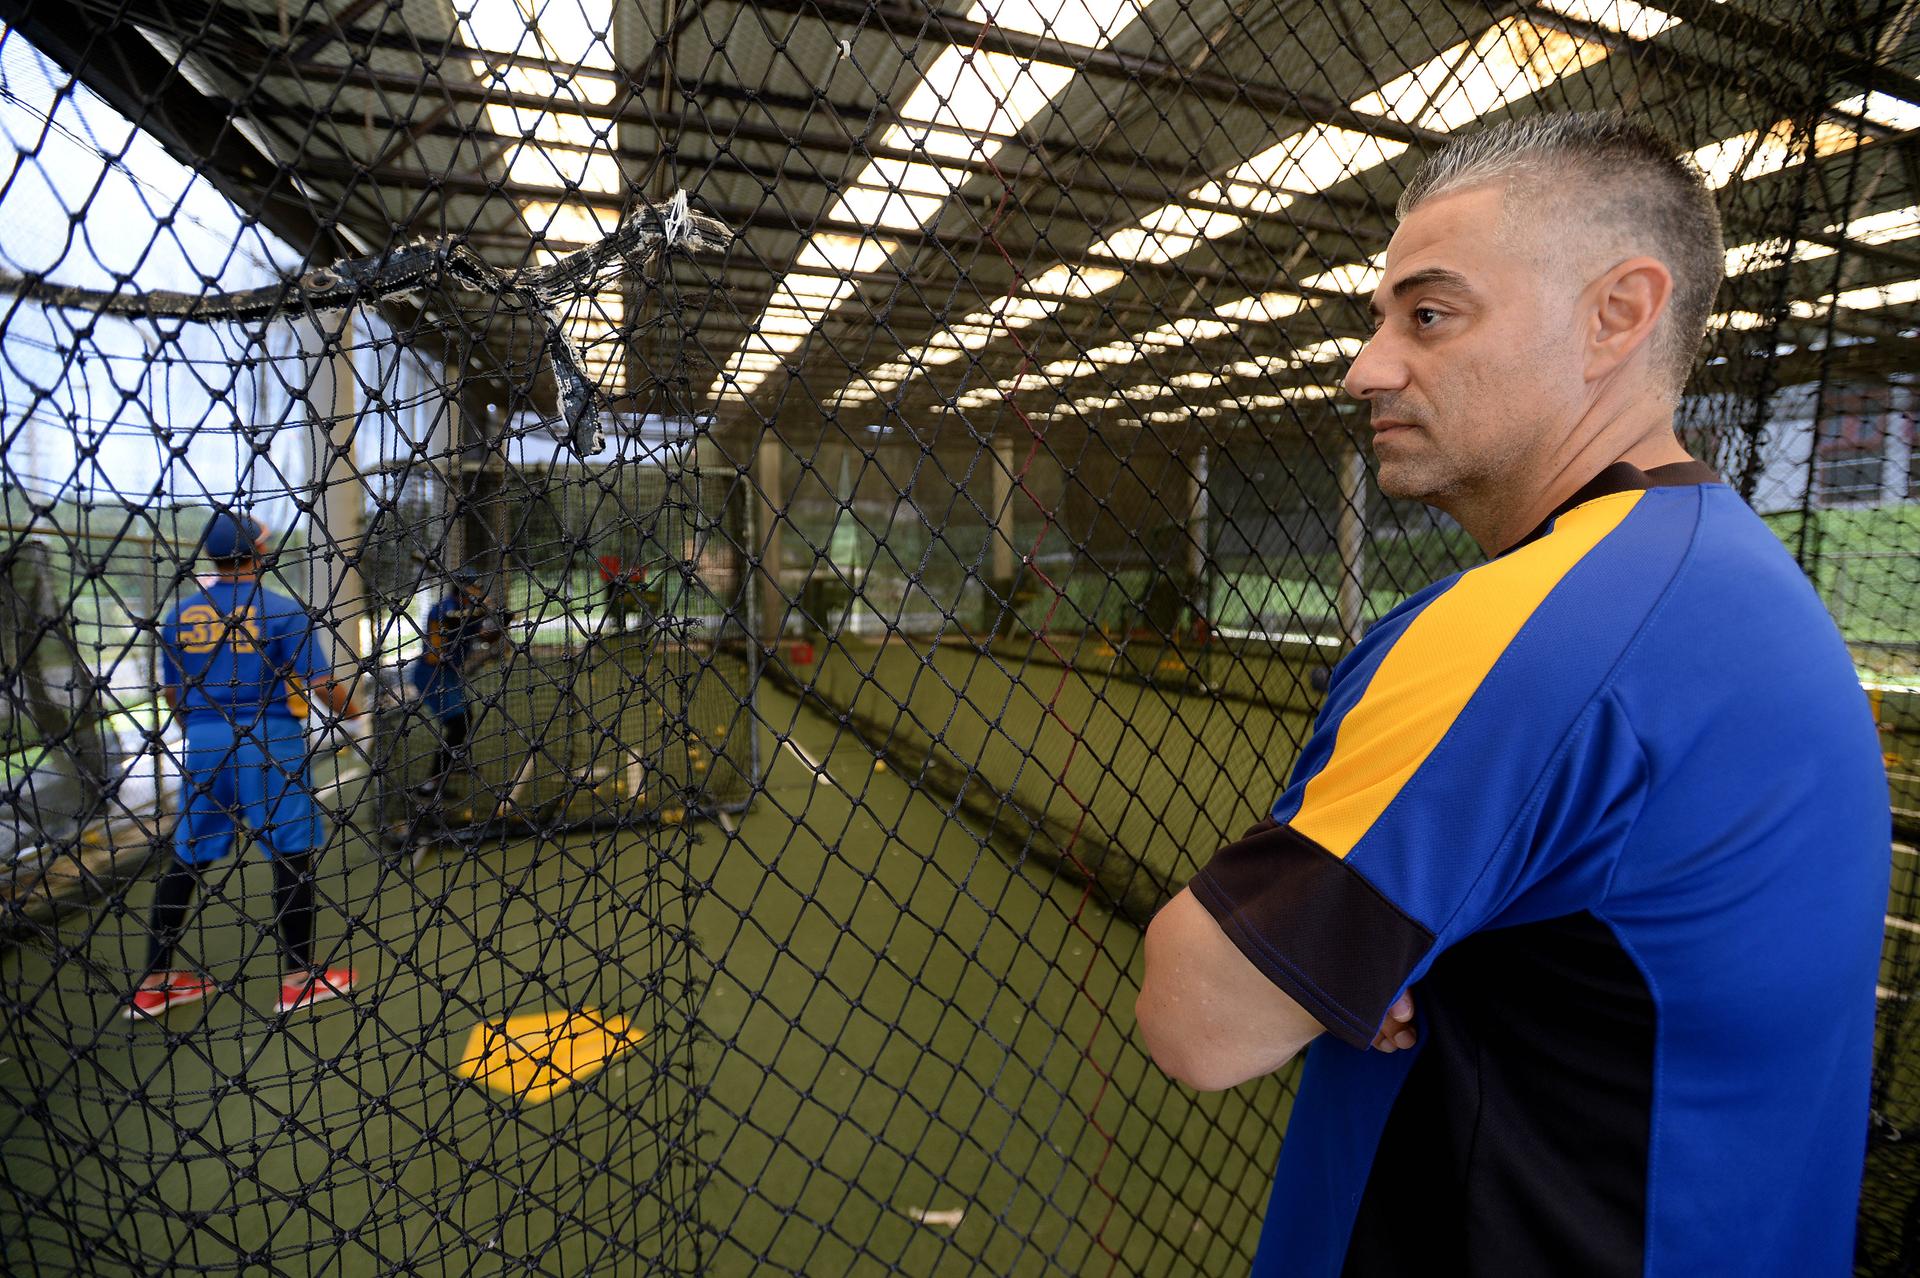 Former Major Leaguer Alex Diaz watches his players in the batting cages. Diaz now runs the athletic department at the Beltran Academy.